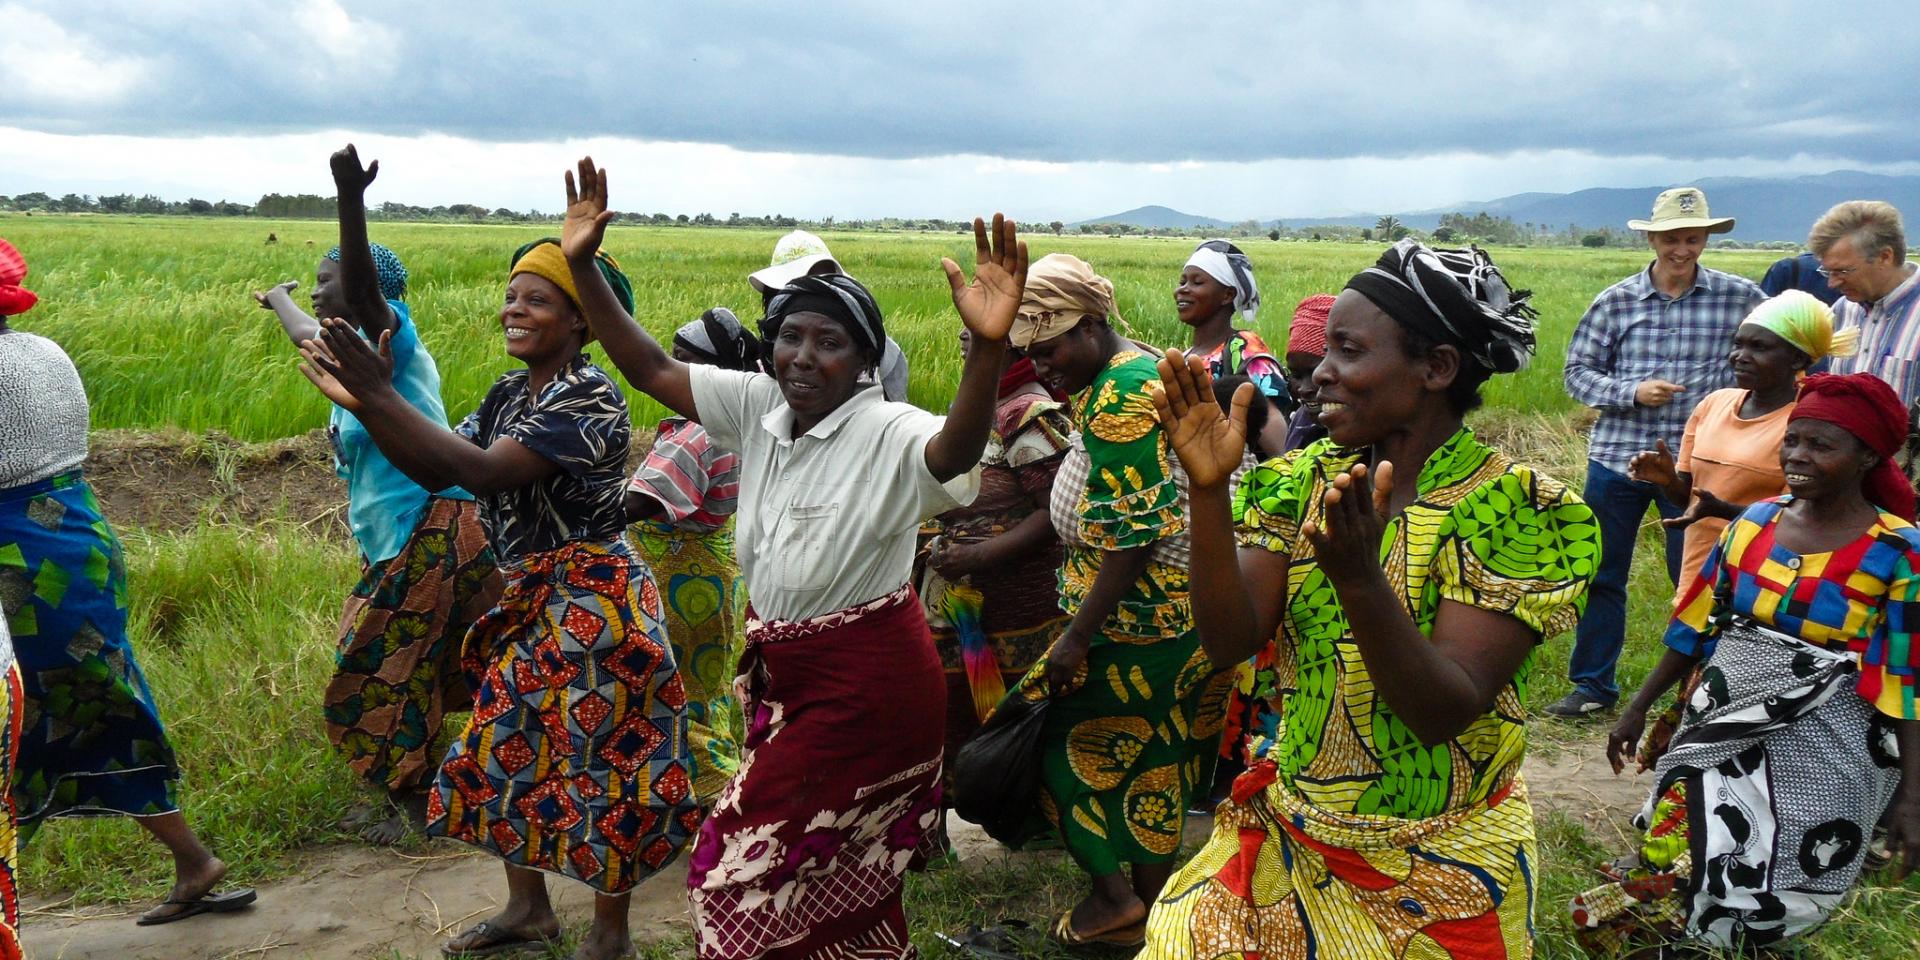 Ex-combatant Burundi women farmers who have been  trained as part of an IRRI / CARE program to grow rice